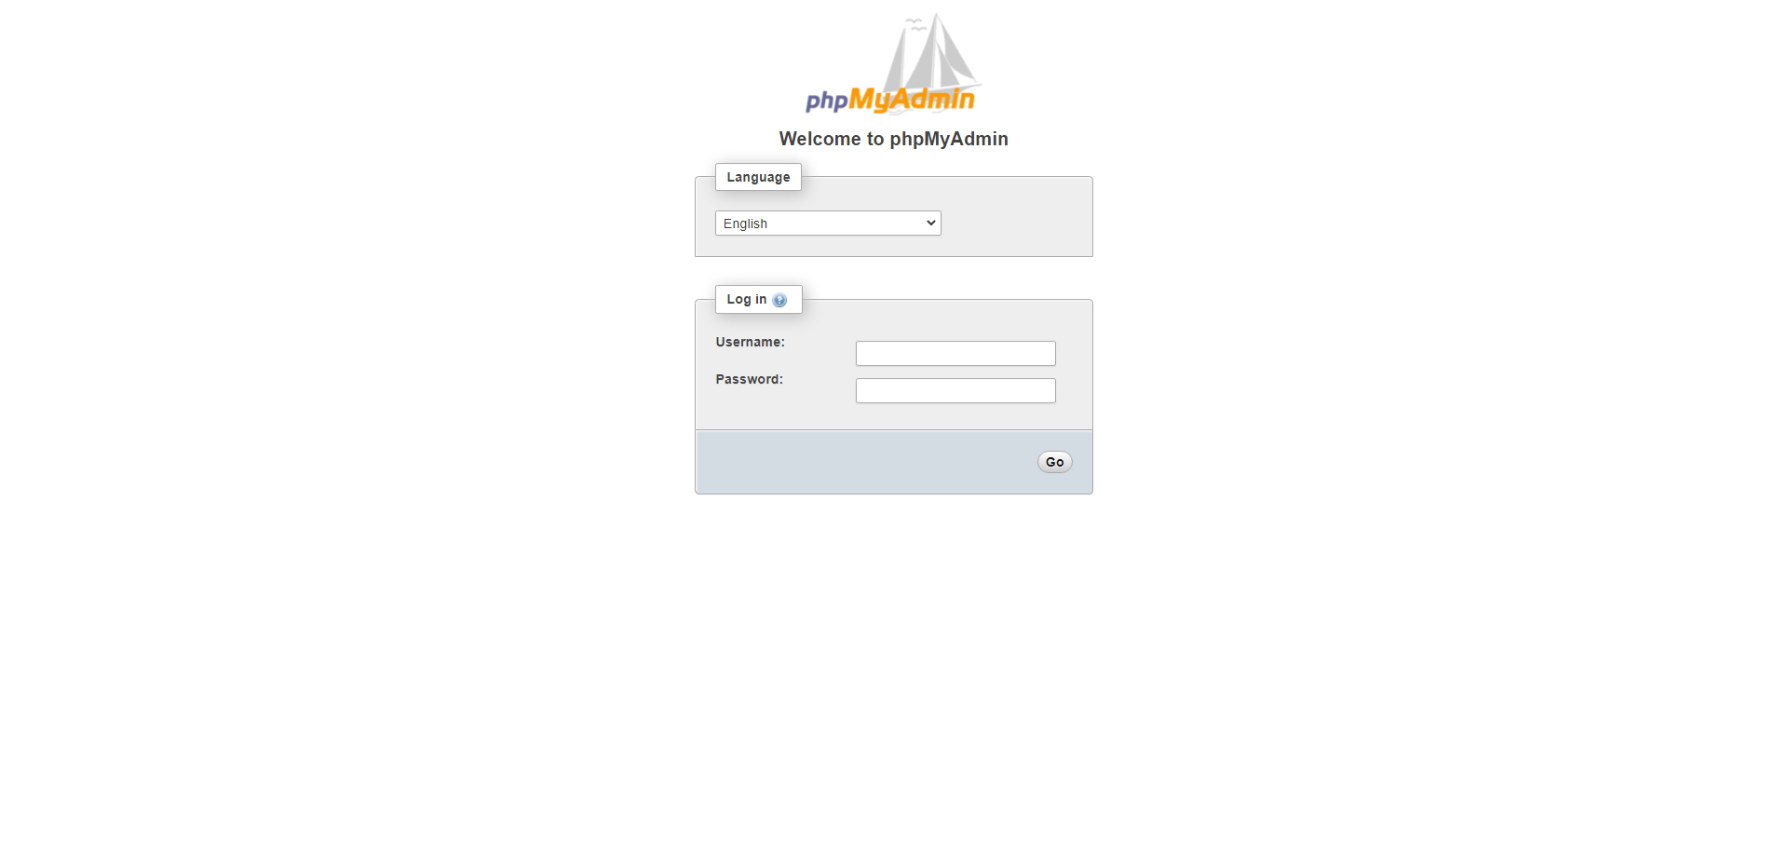 How to Manage MySQL Databases using phpMyAdmin on Paas.id